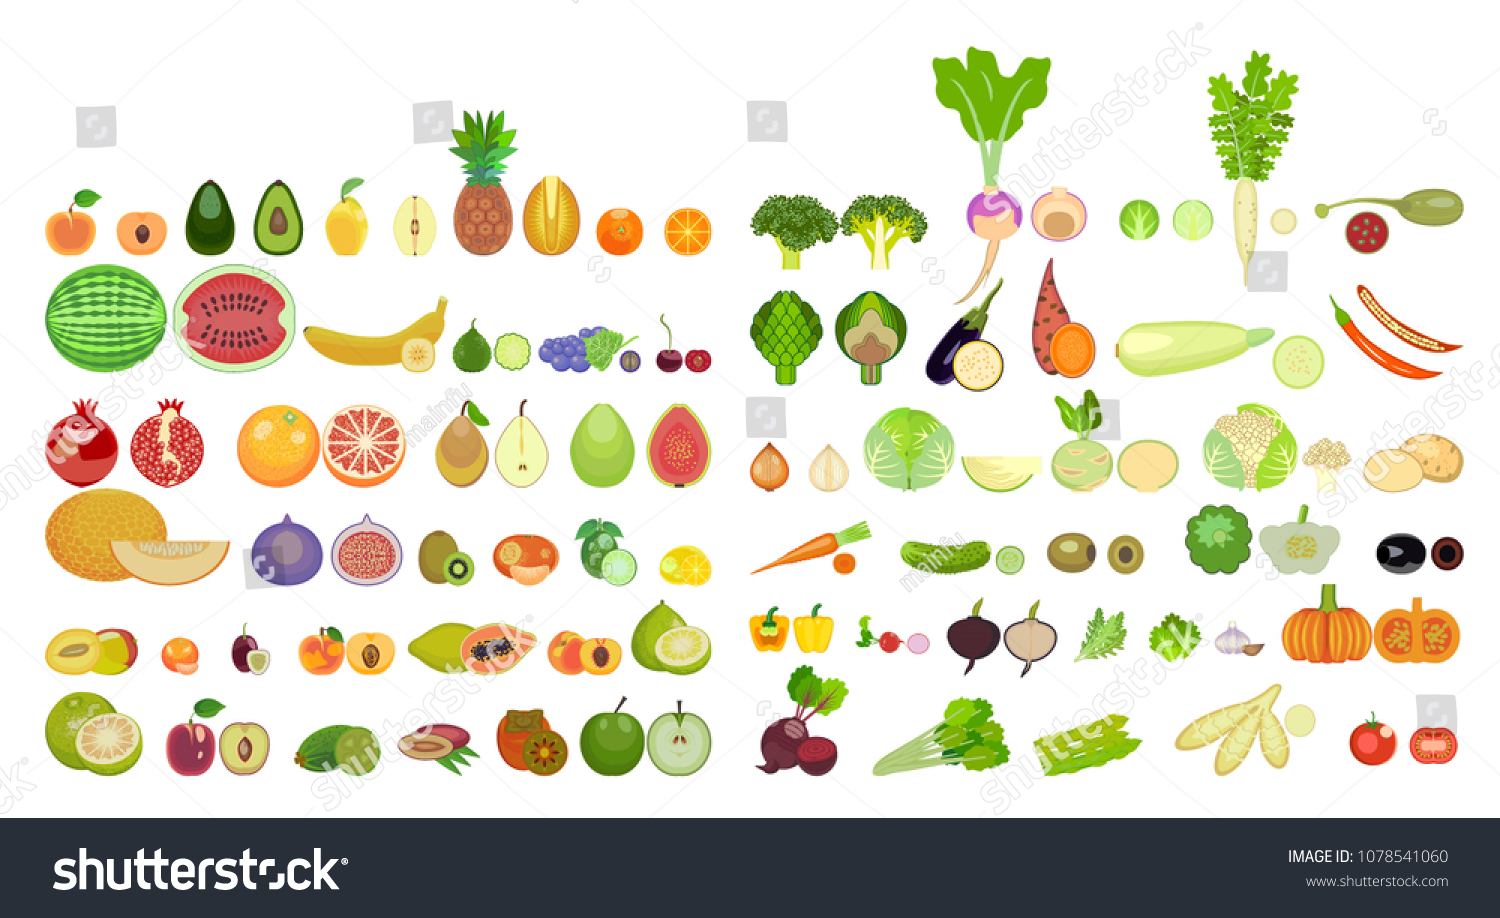 set of icons of fruits and vegetables of different species are whole and in section. Set of cartoon icons isolated on white background. Colorful design for cards, banners, printed materials. #1078541060